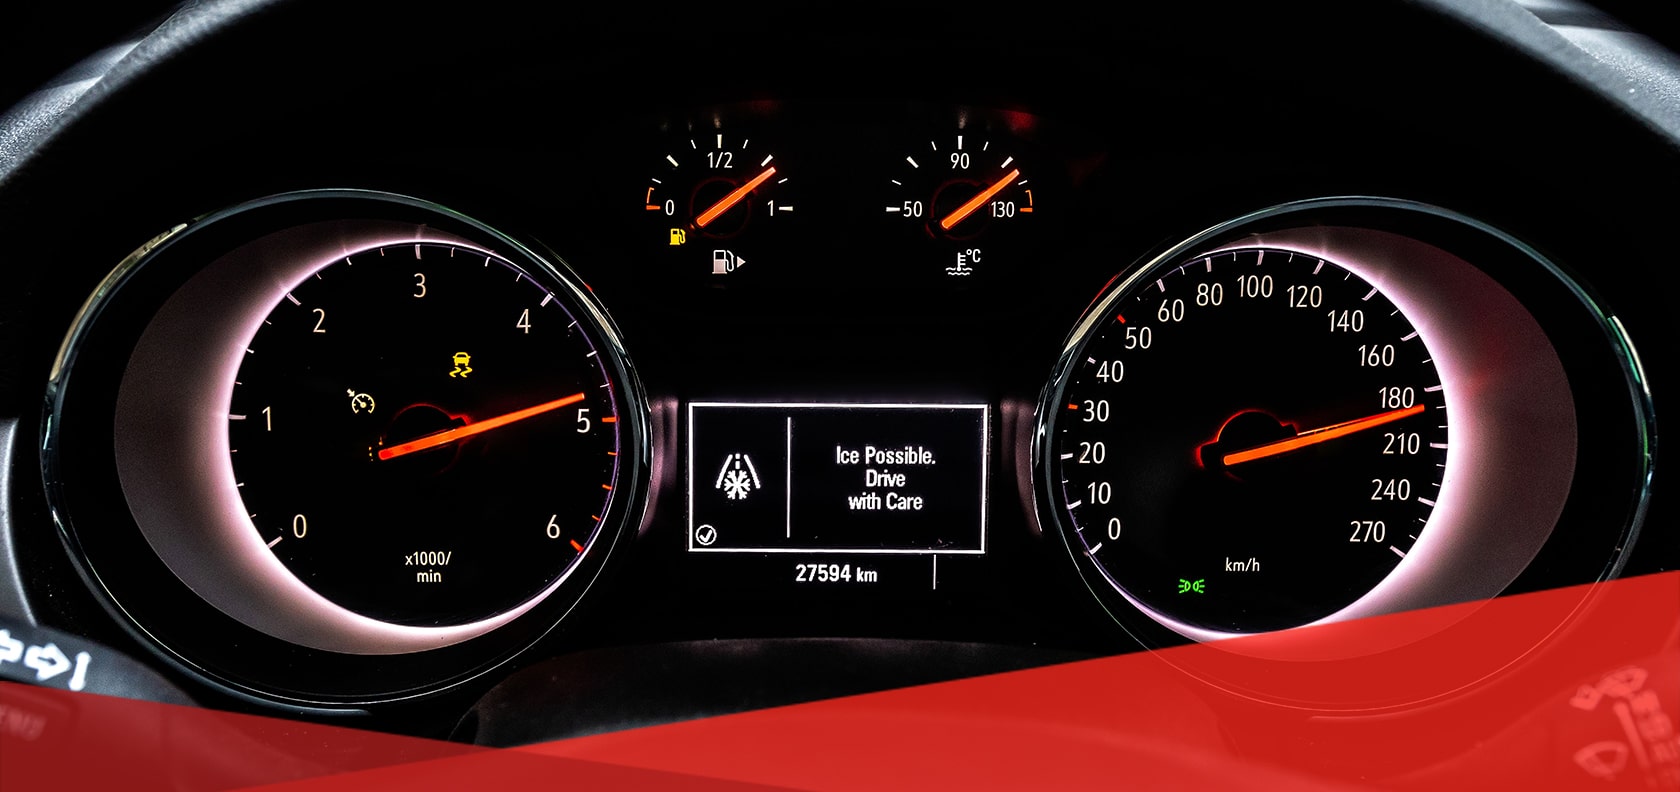 What Is ASR - Traction Control System? - MAPFRE Insurance